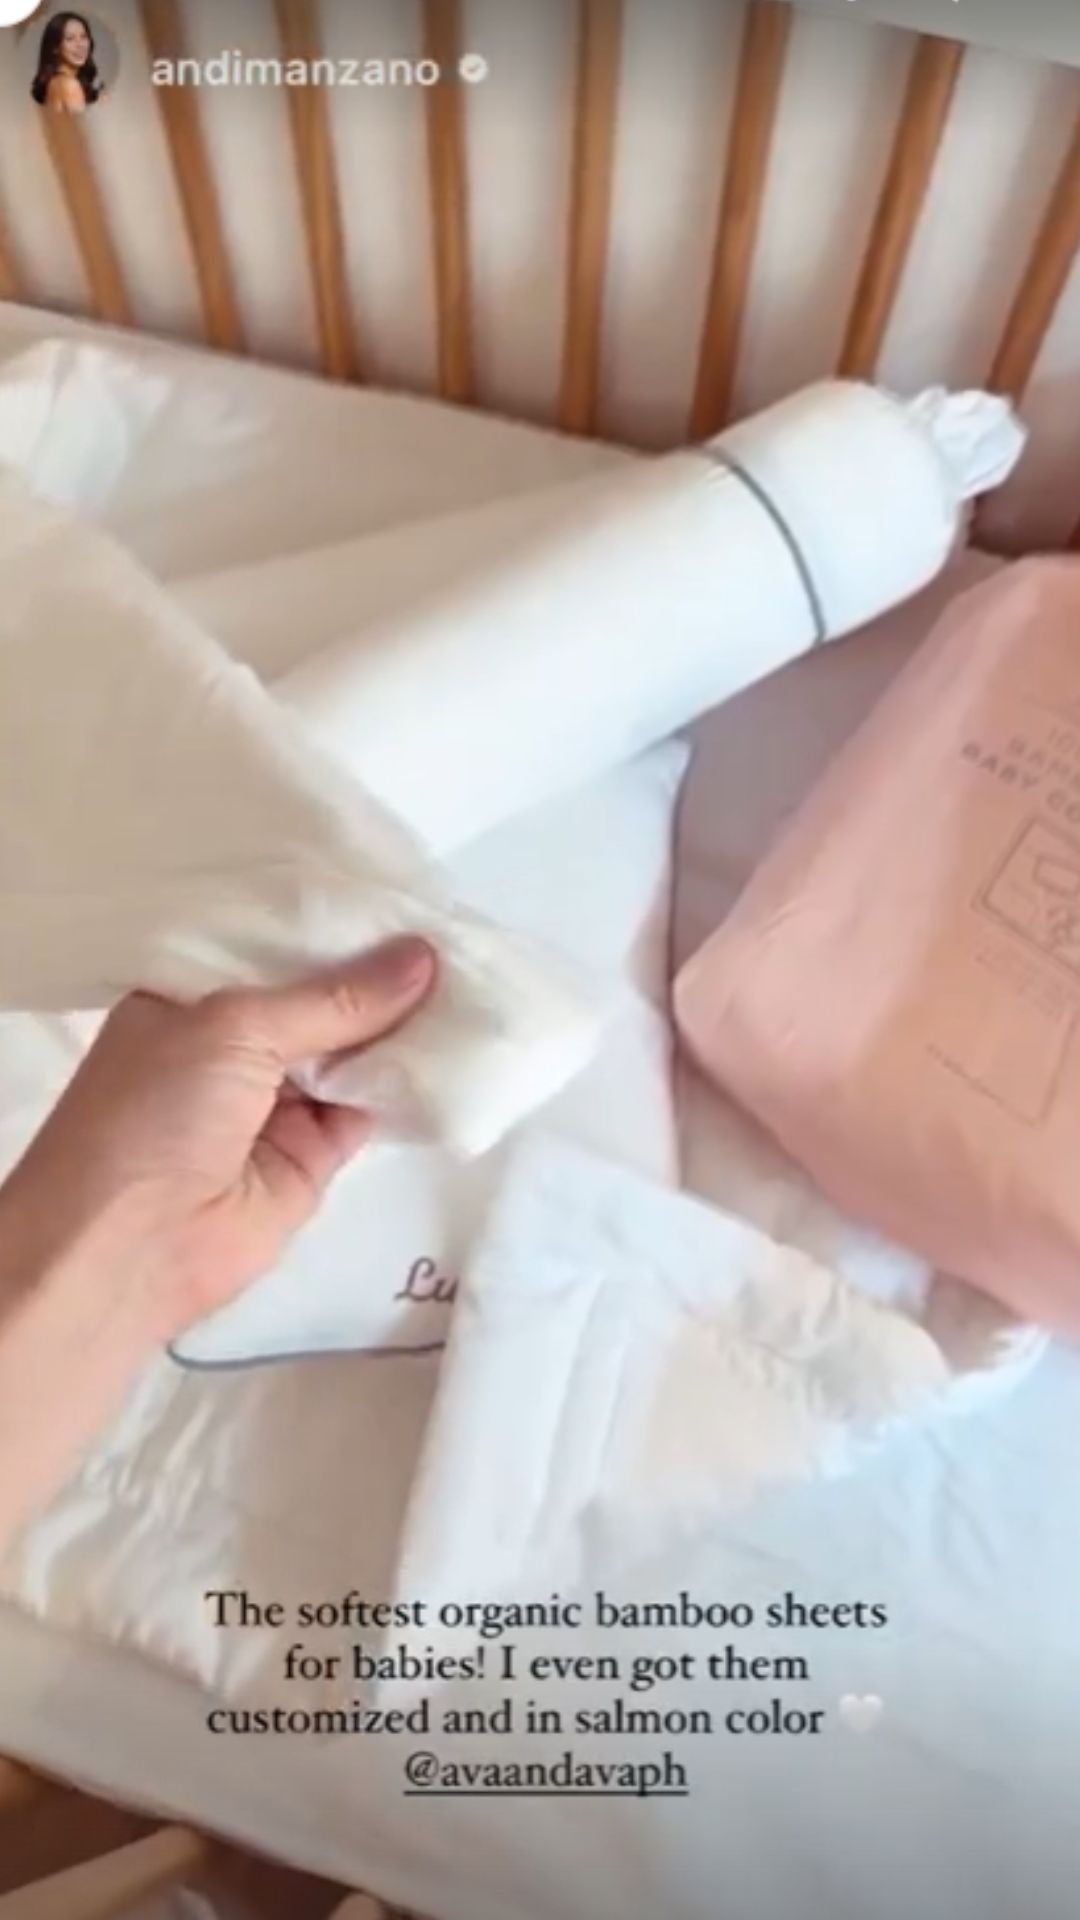 ava and ava ph review buttery breathable soft organic bamboo lyocell baby comforter bedding set (fitted crib sheet, pillowcases, pillows, bolsters) in white and blush pink with personalized embroidery name by gp reyes andi manzano reyes lucia